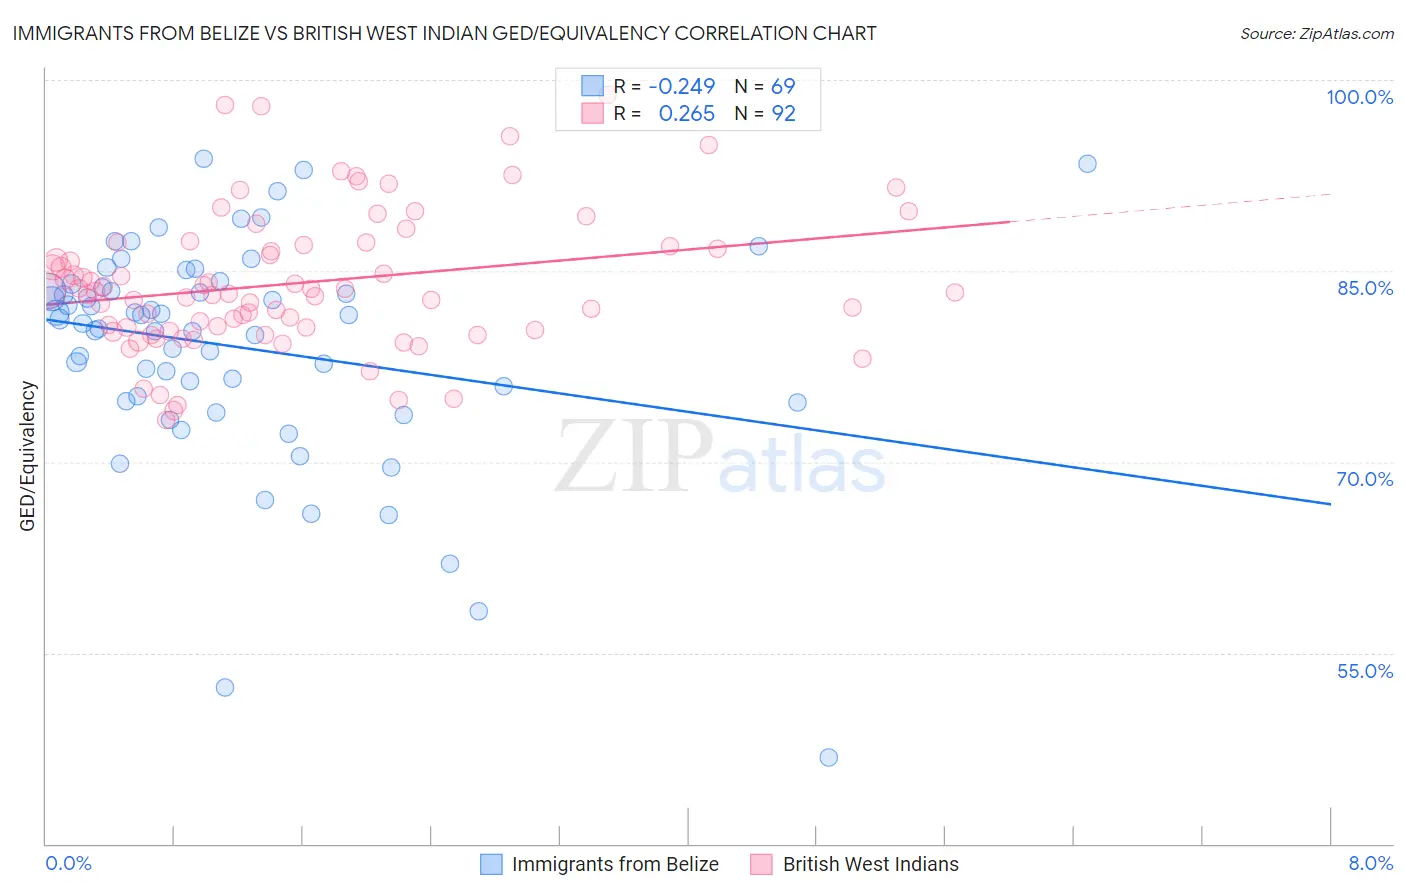 Immigrants from Belize vs British West Indian GED/Equivalency